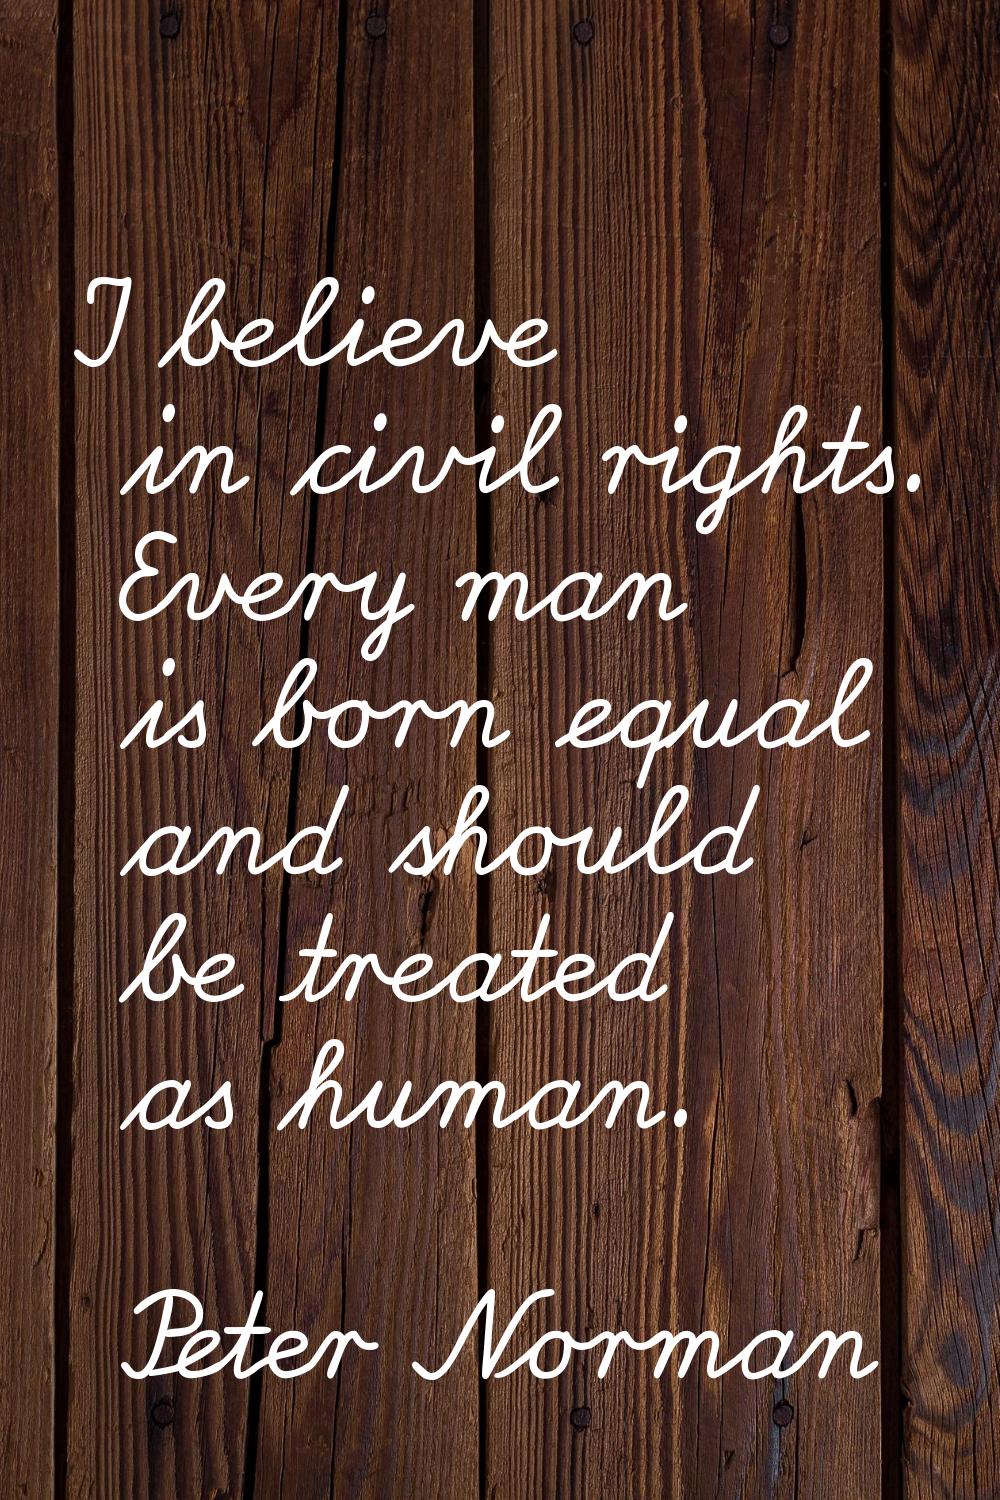 I believe in civil rights. Every man is born equal and should be treated as human.